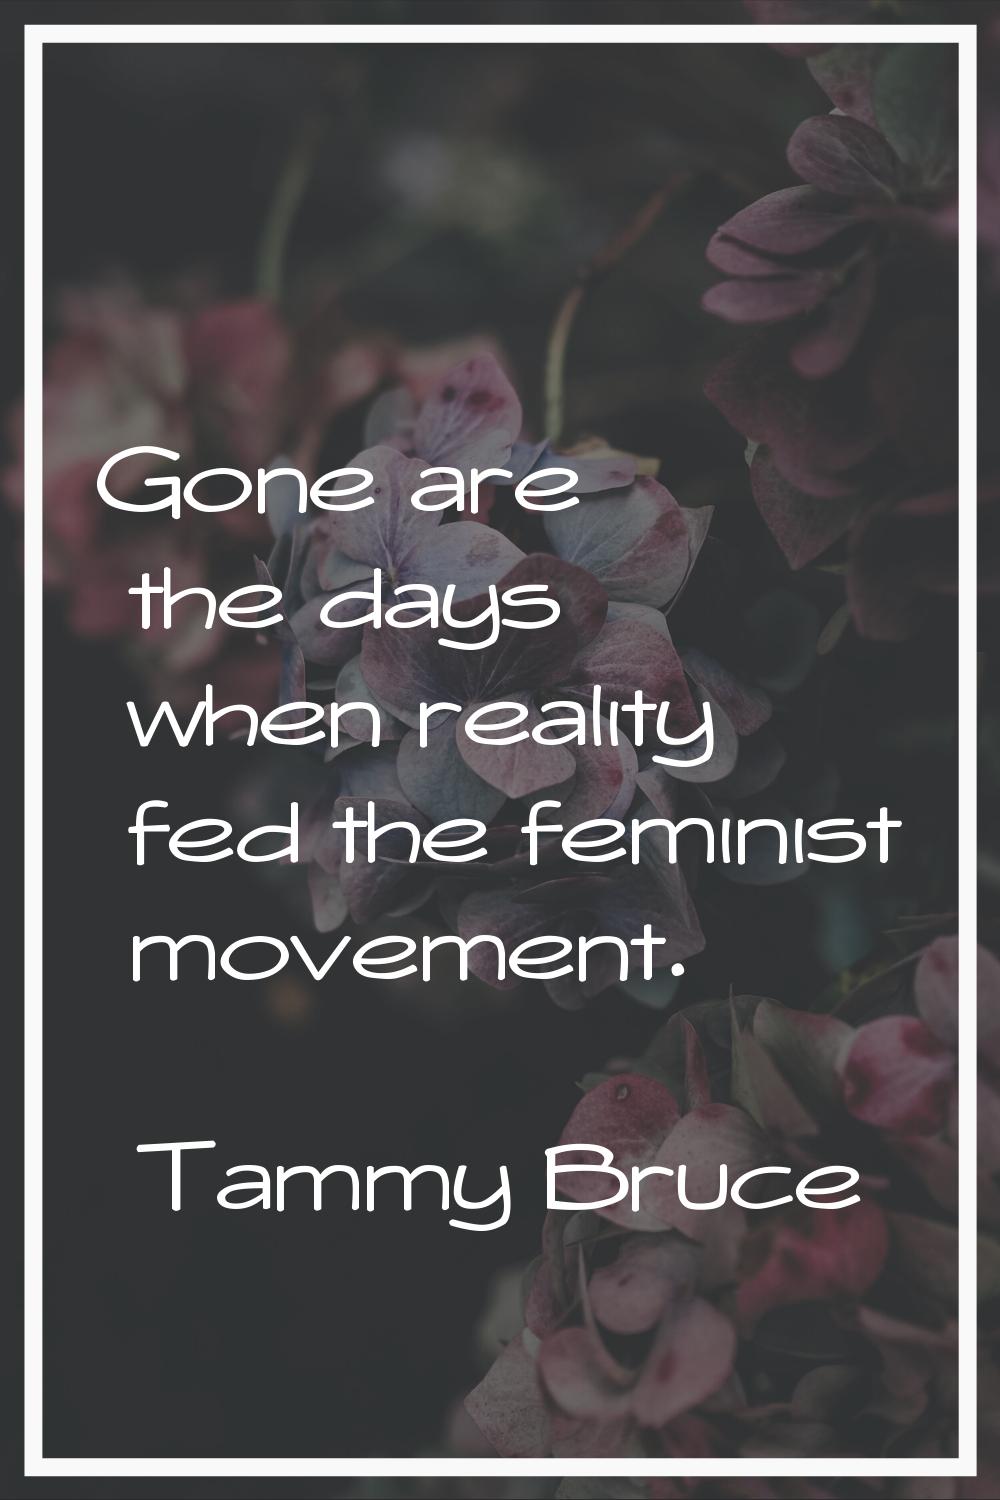 Gone are the days when reality fed the feminist movement.